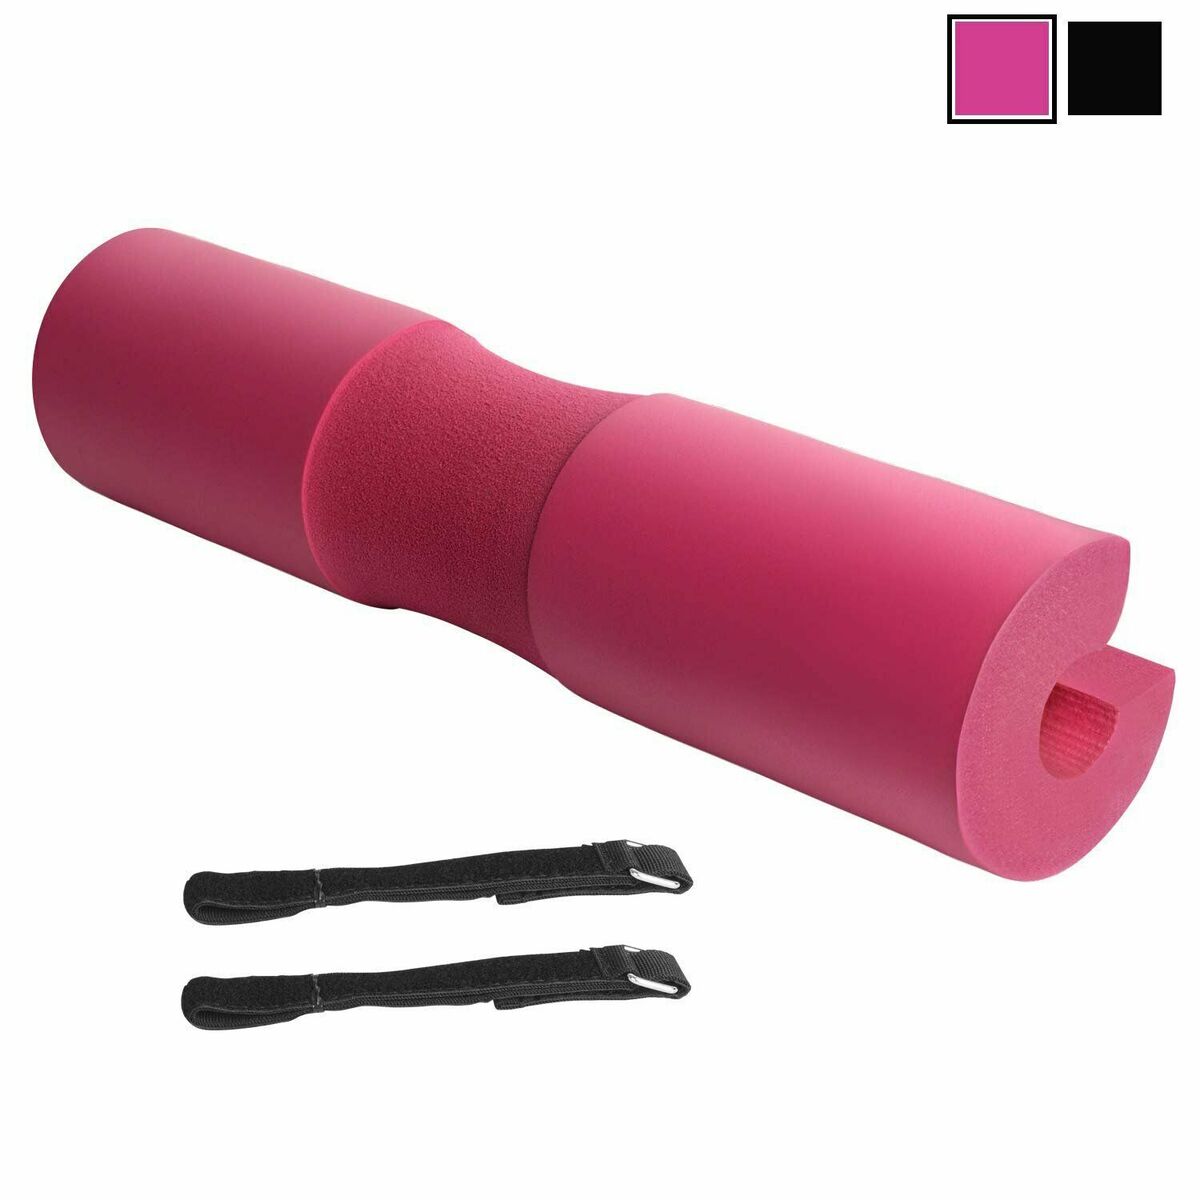 Squat Pad Barbell Pad for Squats, Lunges and Hip Thrusts - Foam